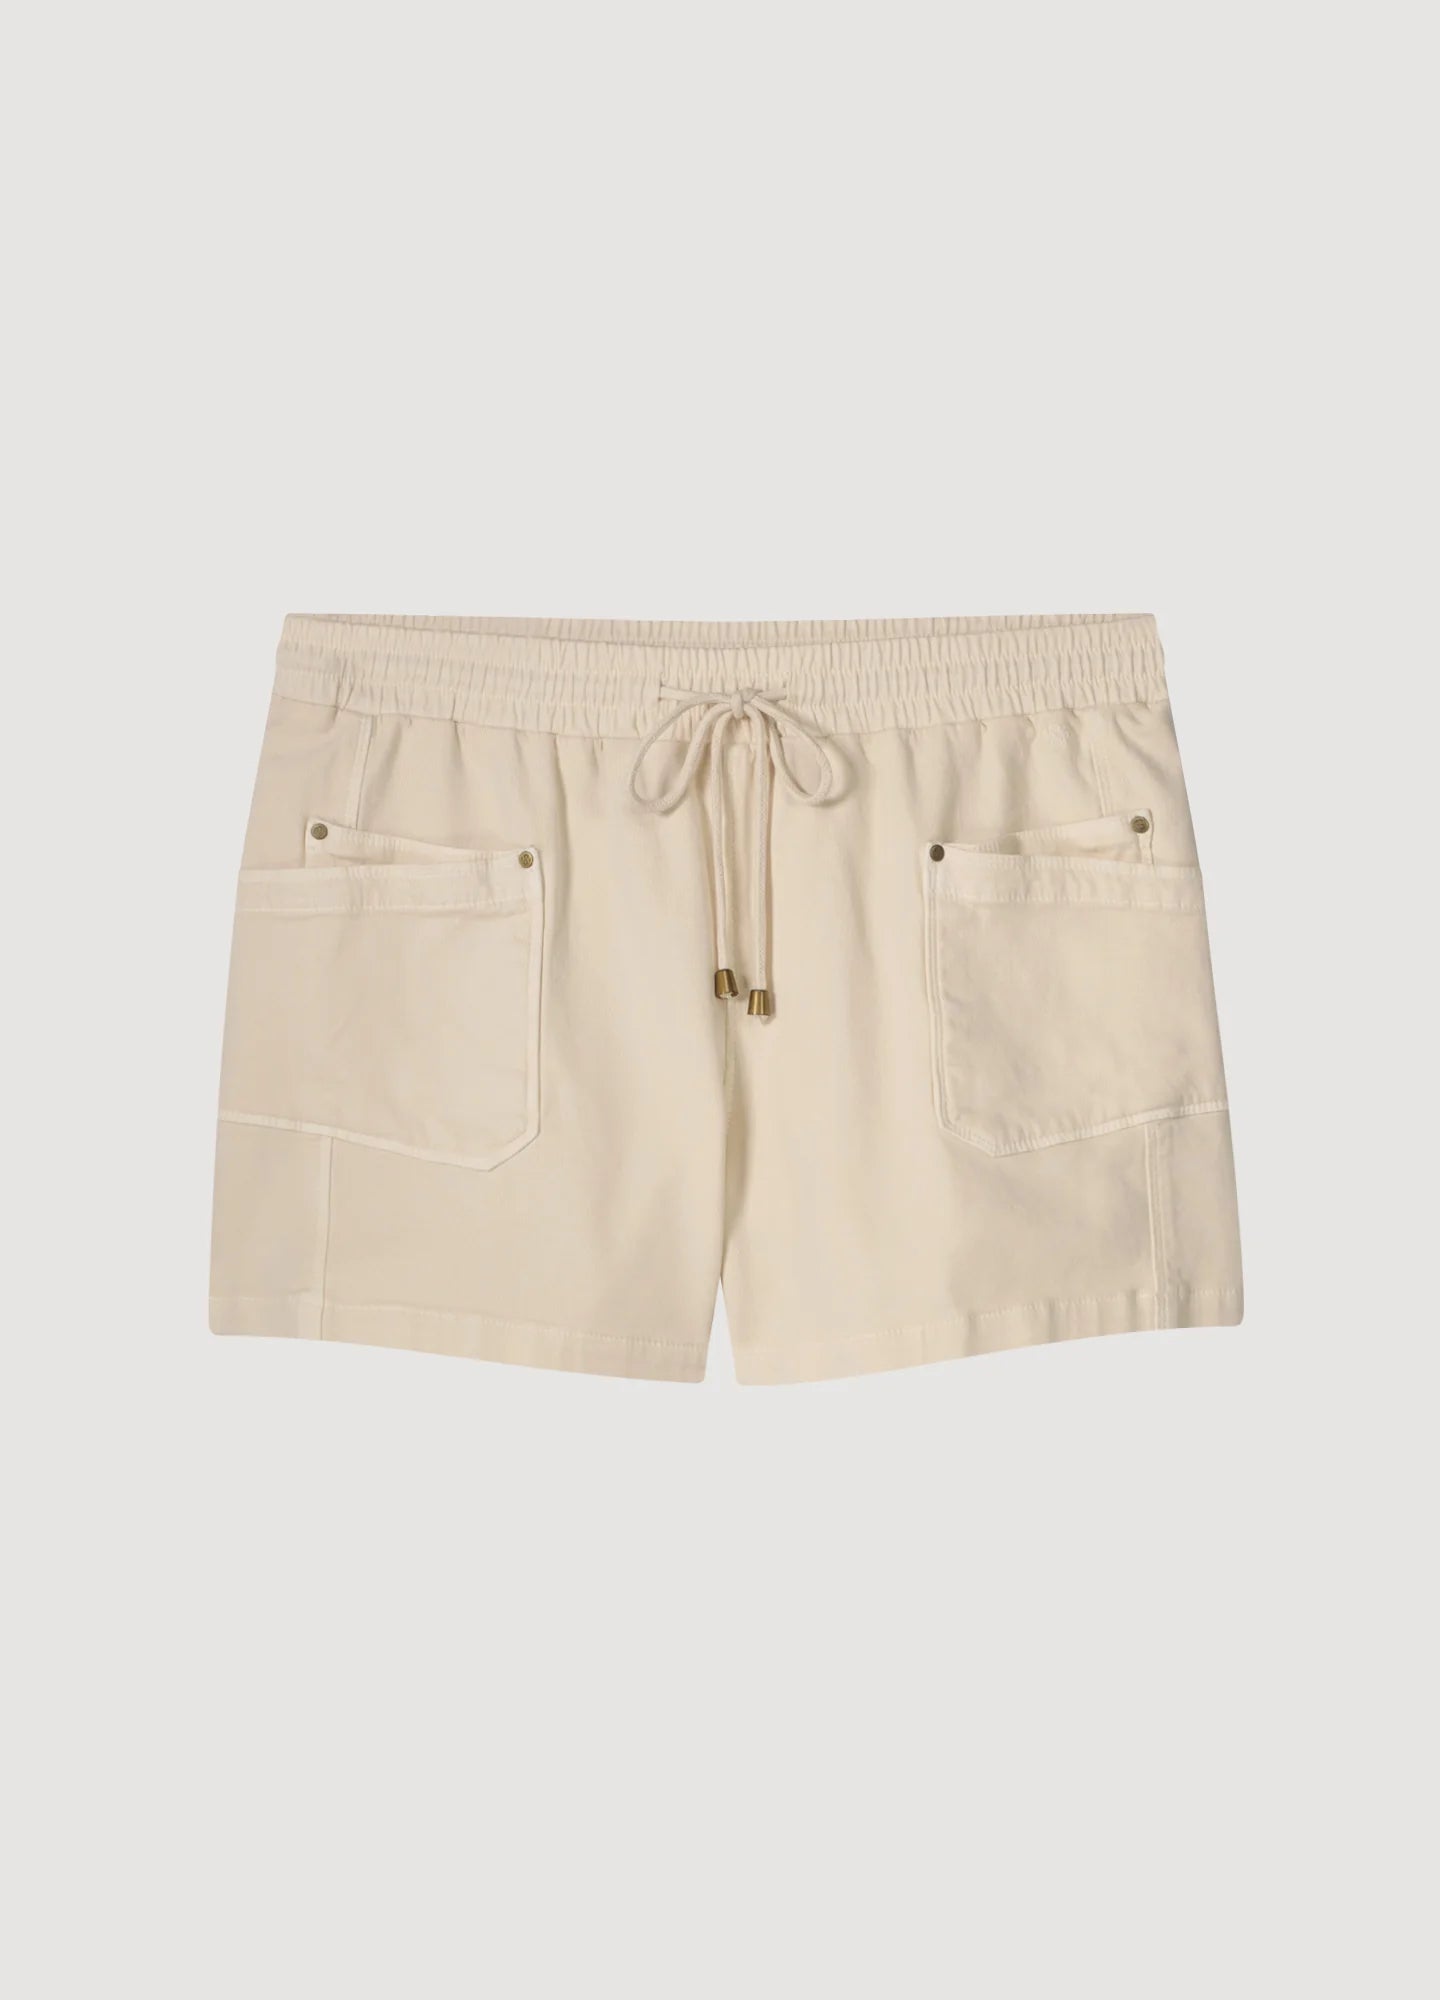 Jogger Fit Shorts in Ivory